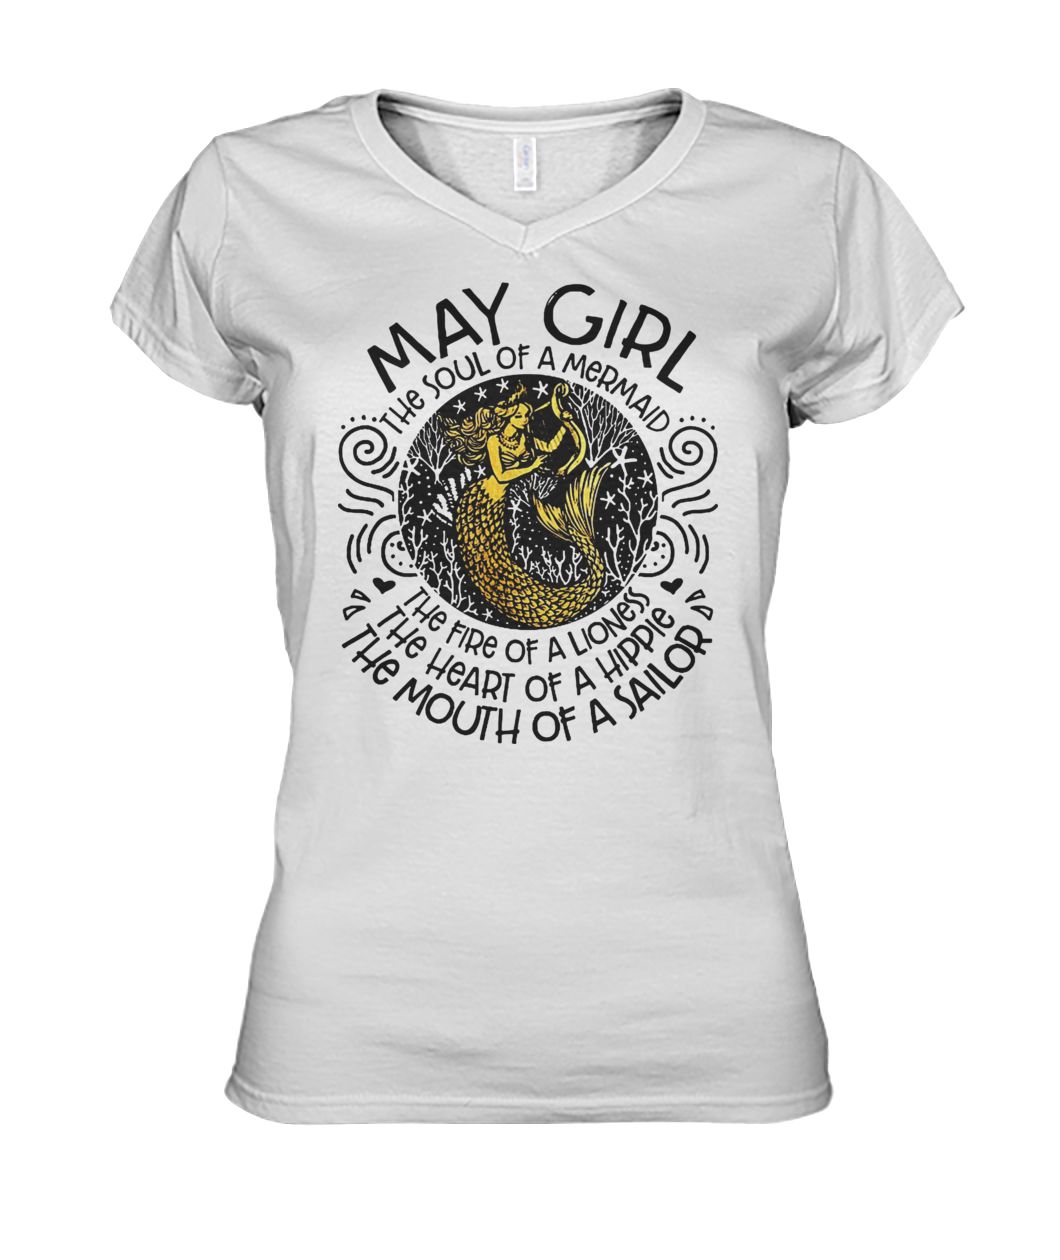 May girl the soul of a mermaid the fire of a lioness women's v-neck